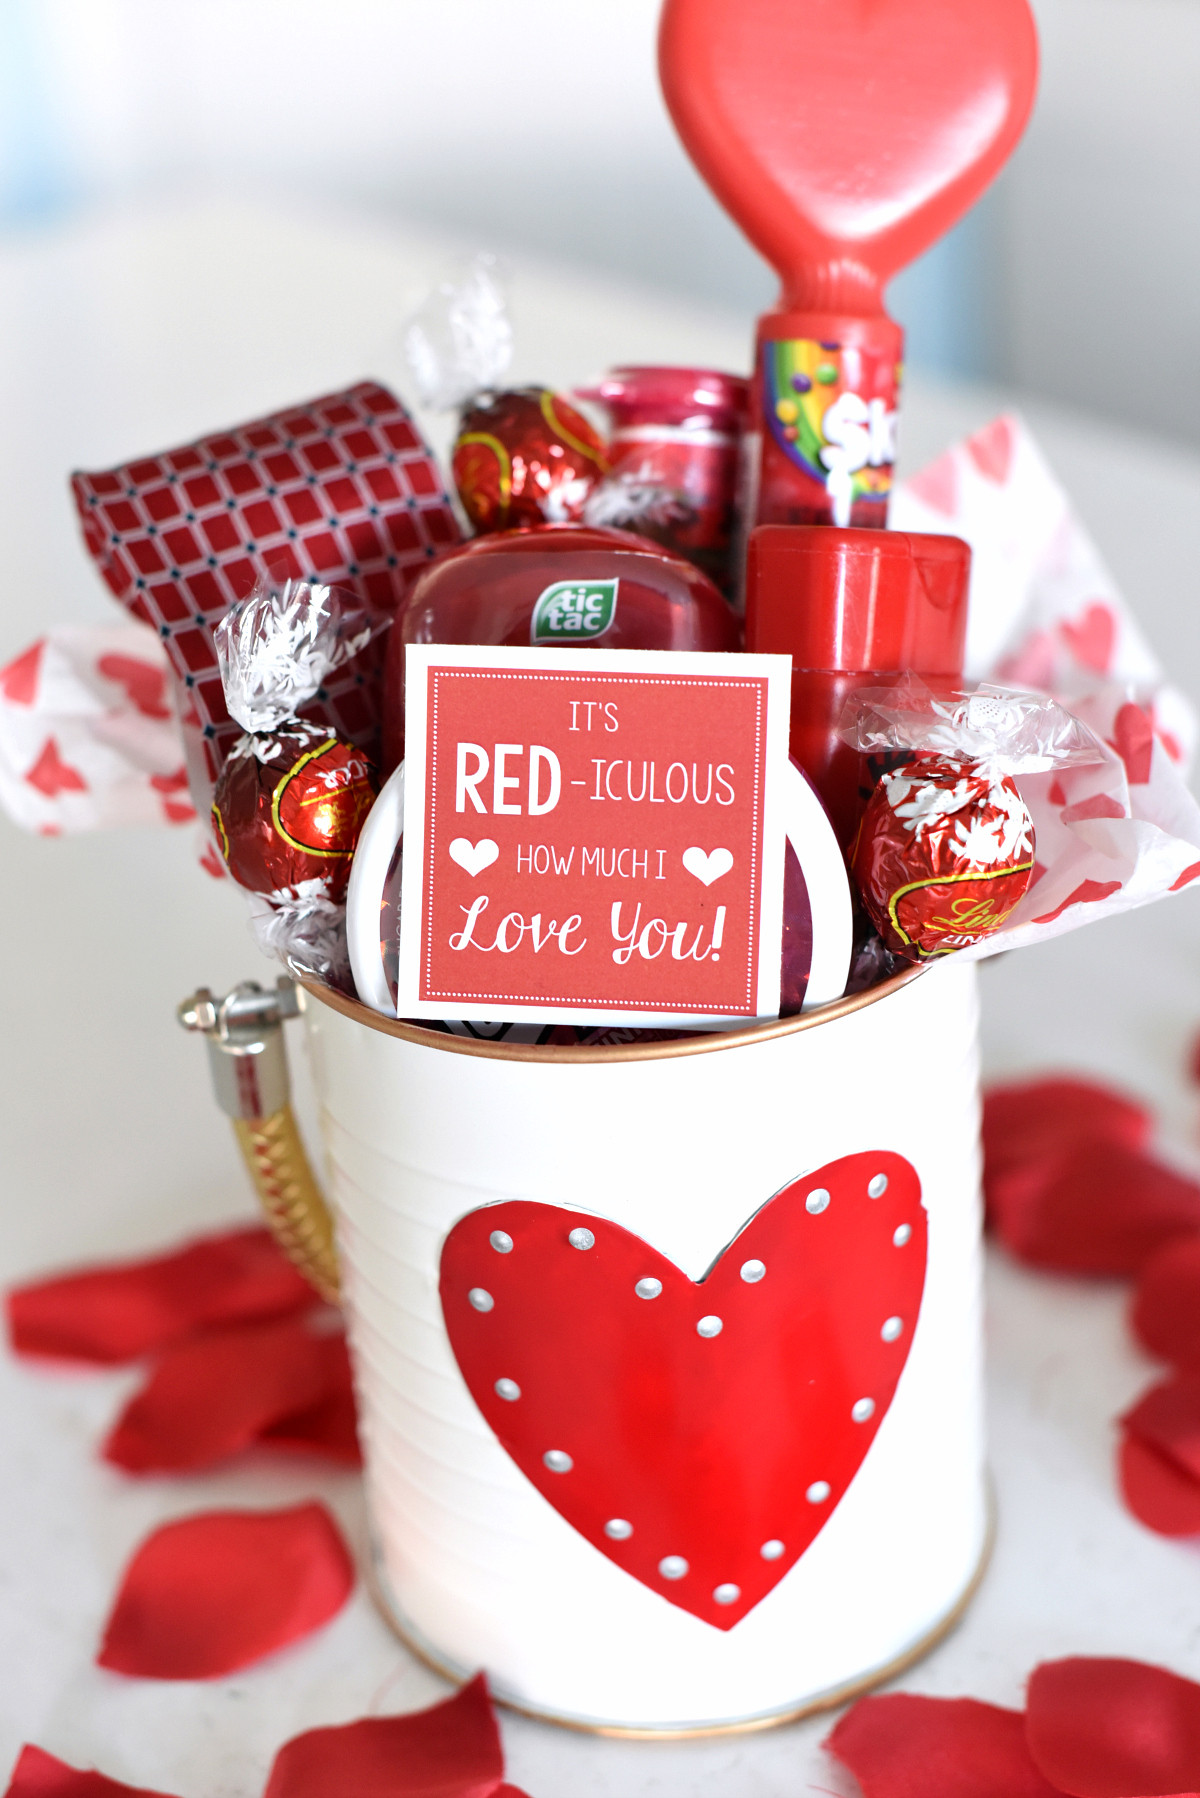 Valentines Day Gifts For Teens
 25 DIY Valentine s Day Gift Ideas Teens Will Love